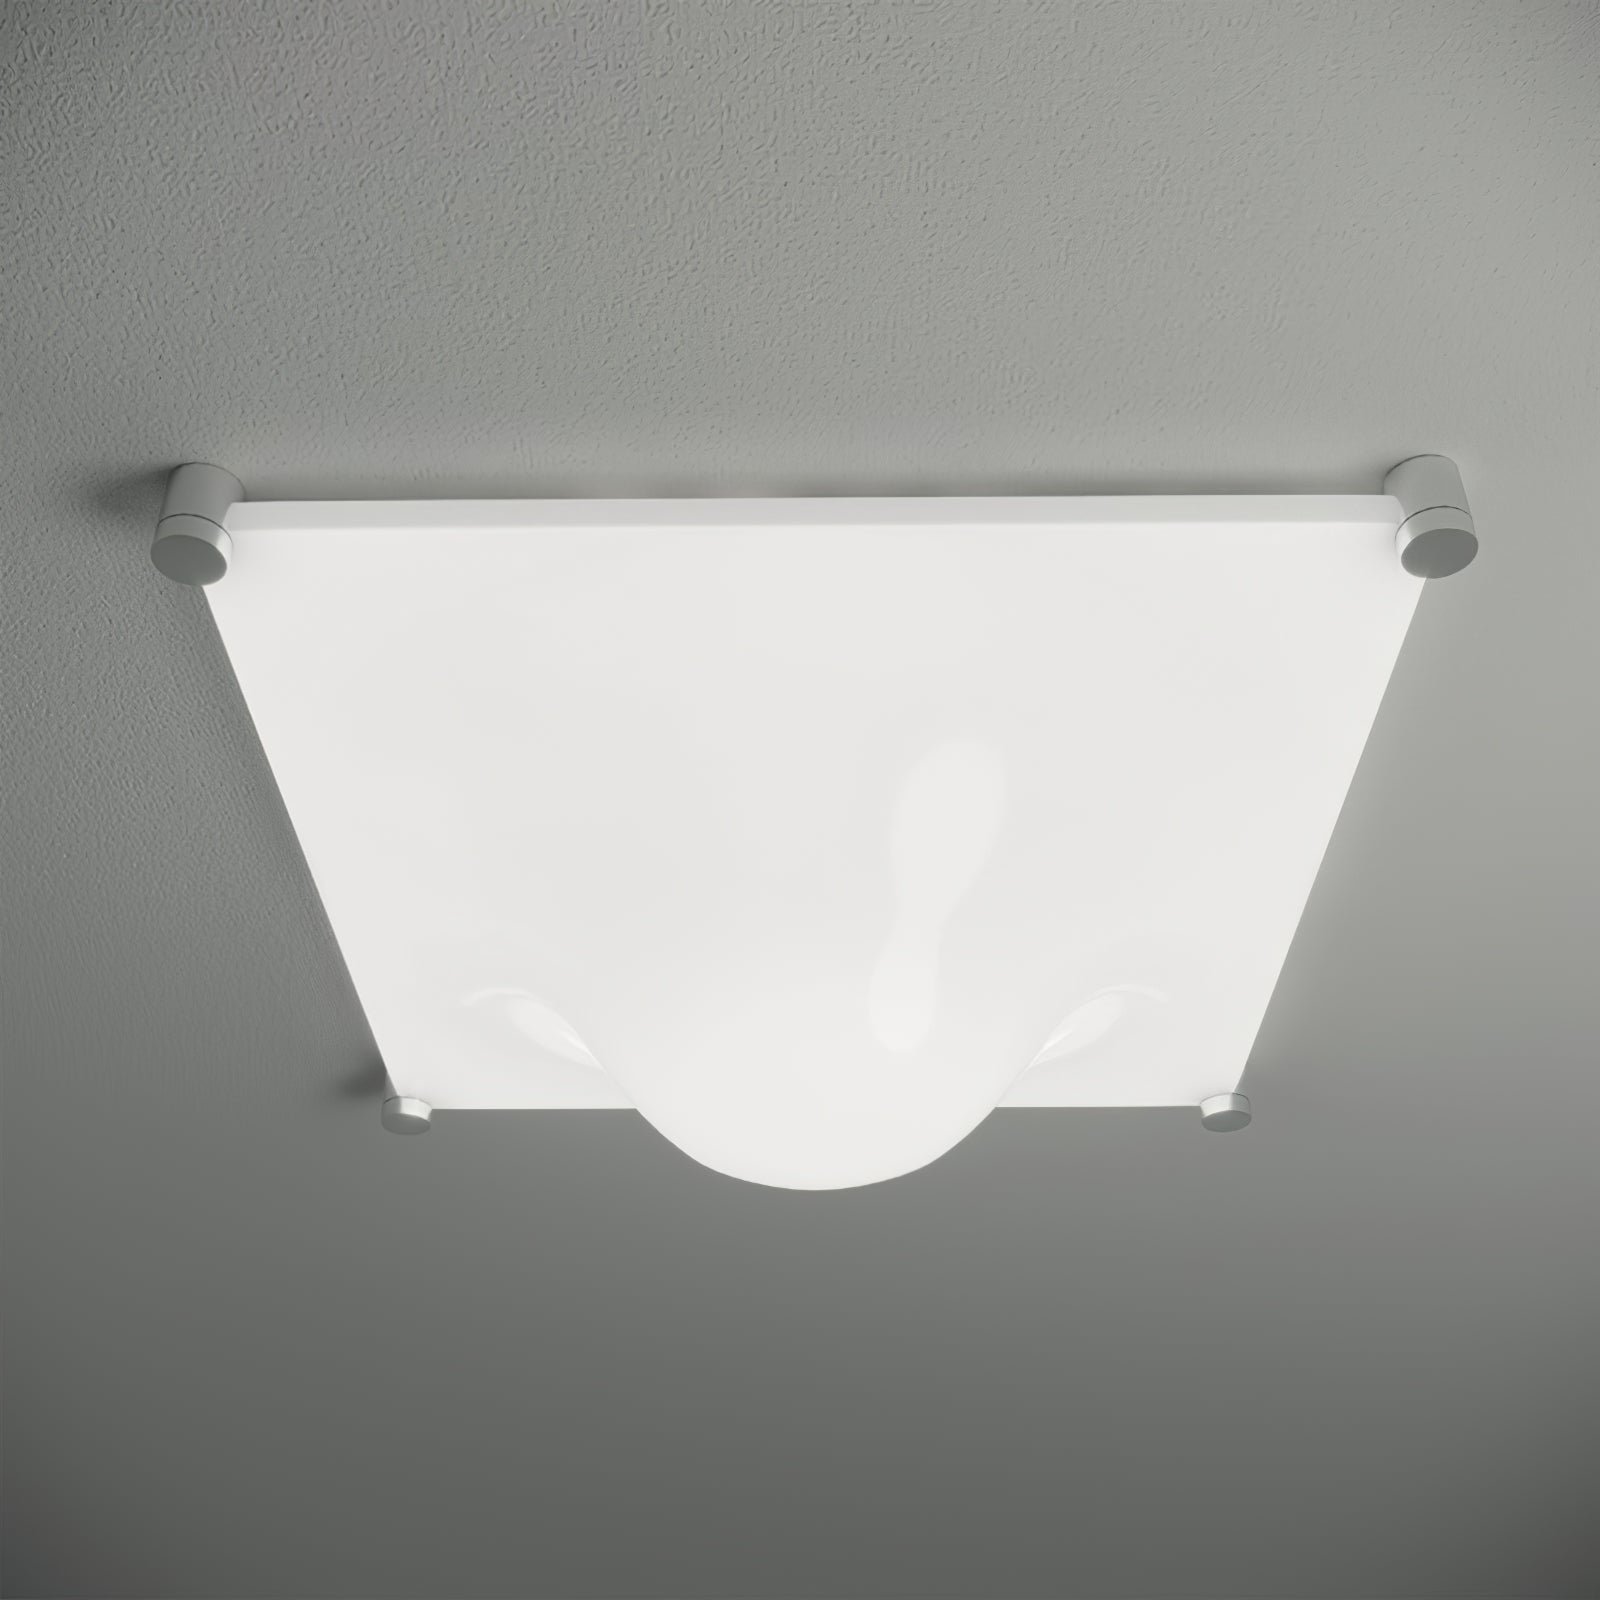 Modern Bolla Ceiling Light in Chrome and Clear Finish, 13.8" Diameter x 13.8" Width (35cm Dia x 35cm W), Cool Lighting